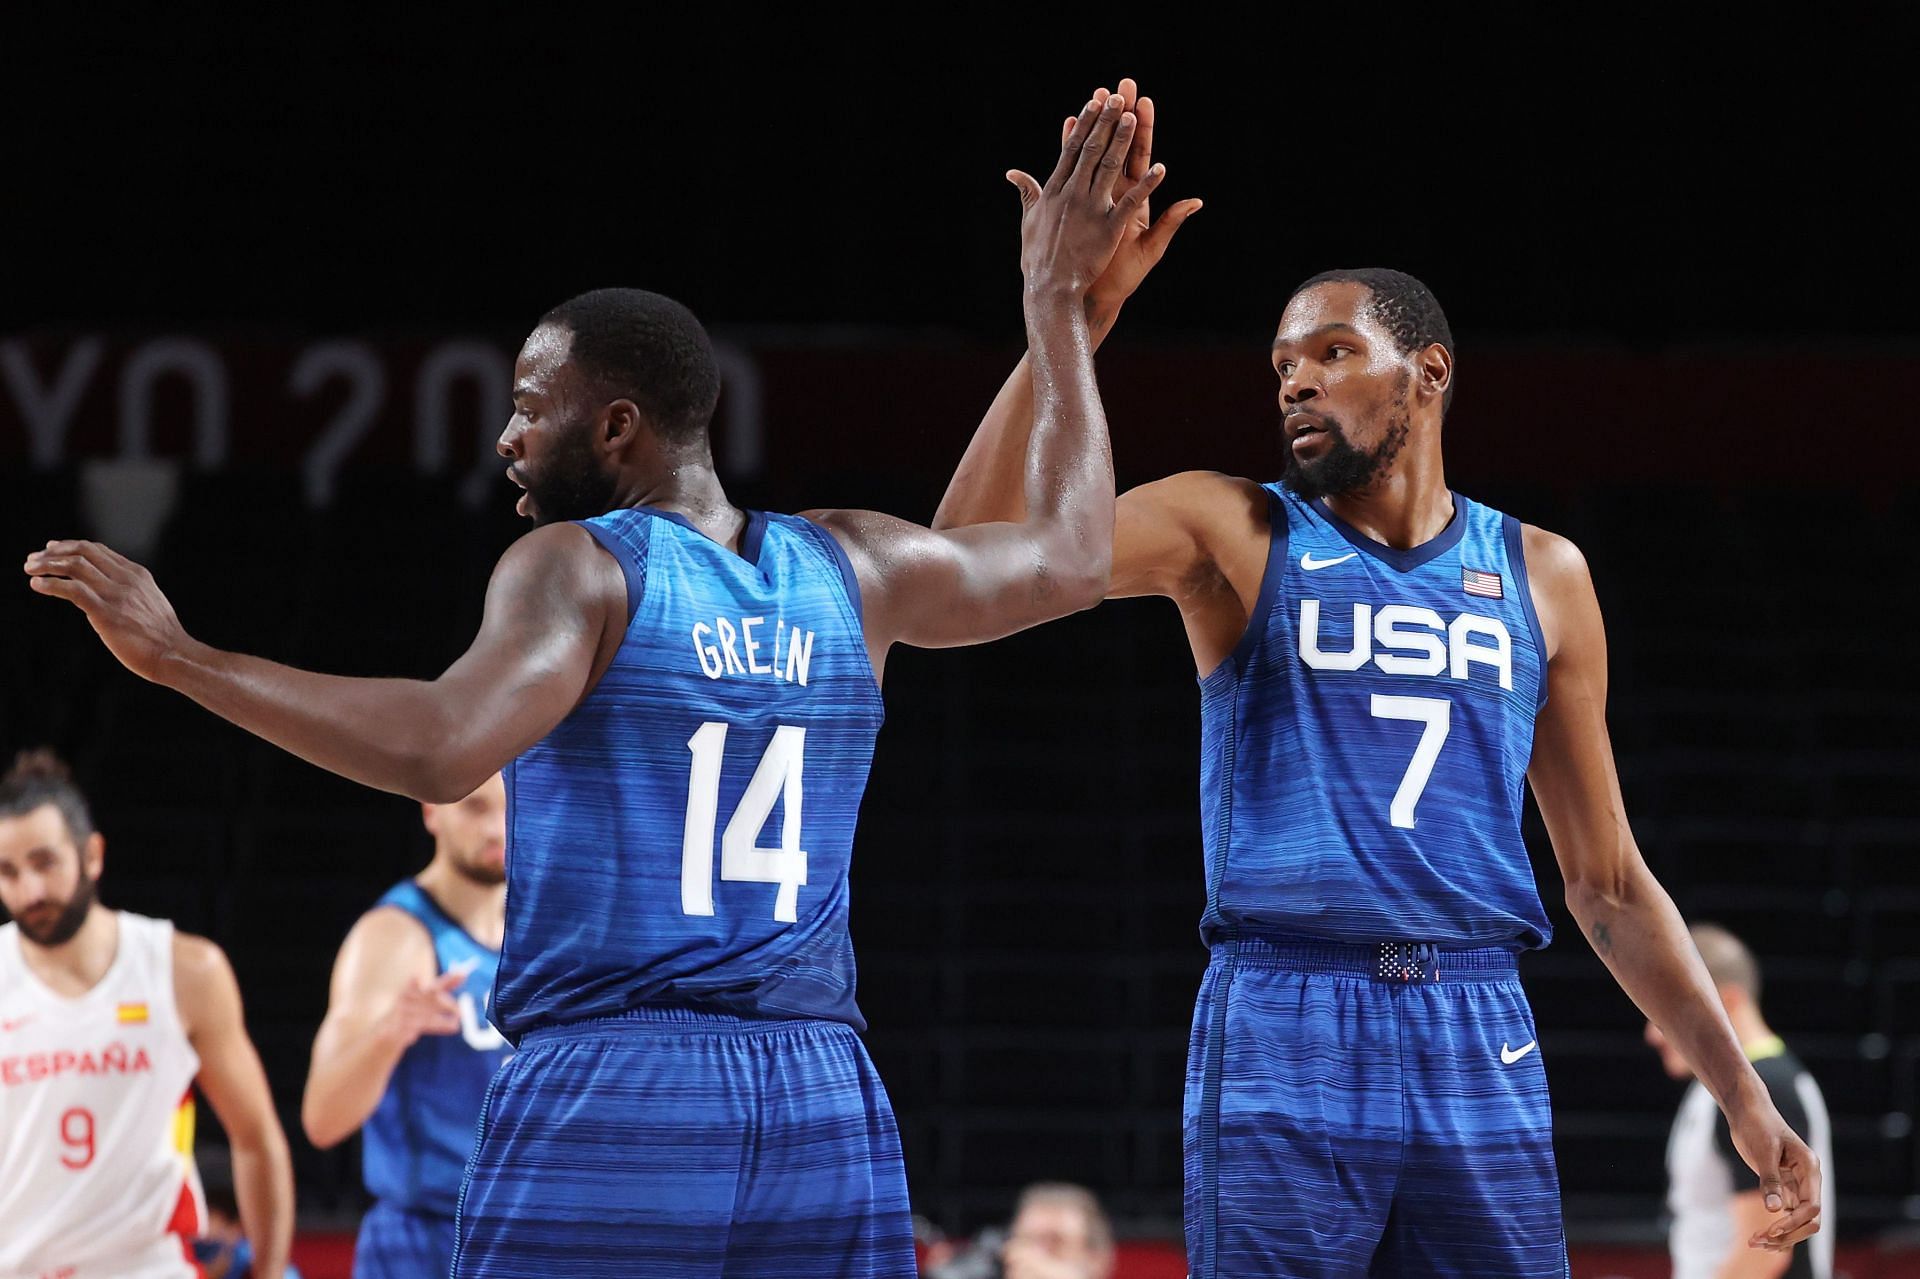 Draymond Green and Kevin Durant playing for Team USA